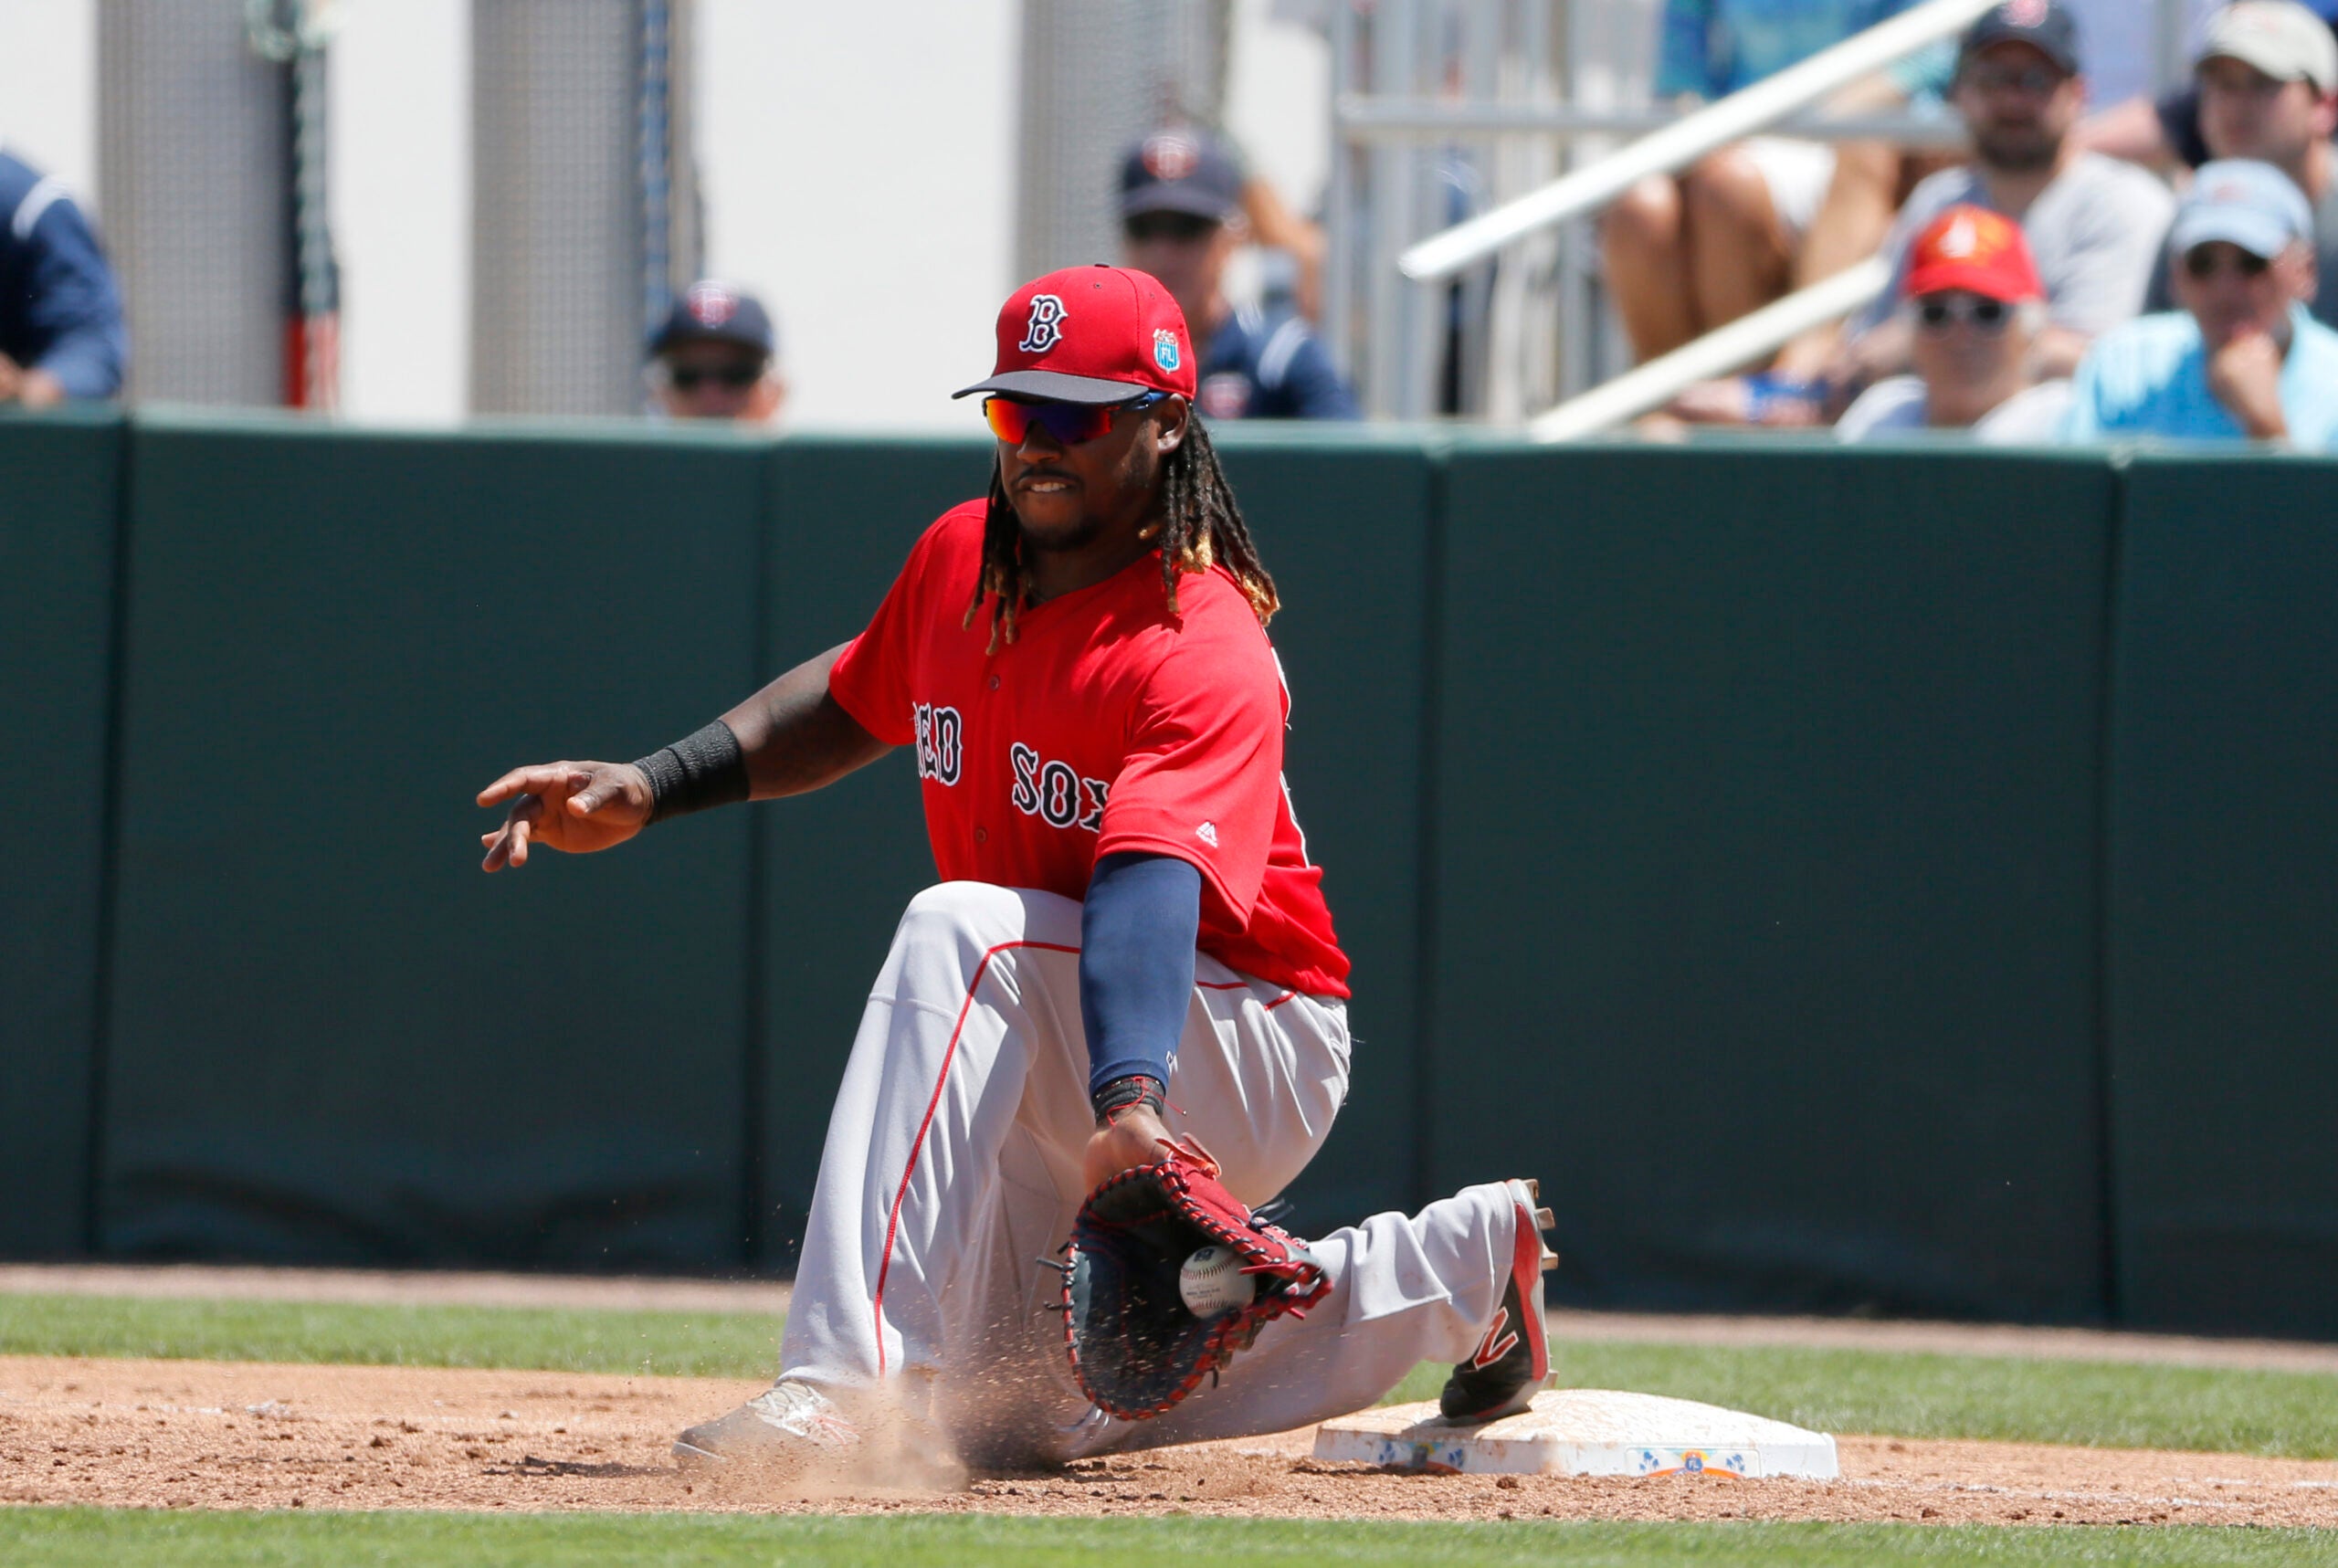 Hanley Ramirez says he's 'back at home' in the infield